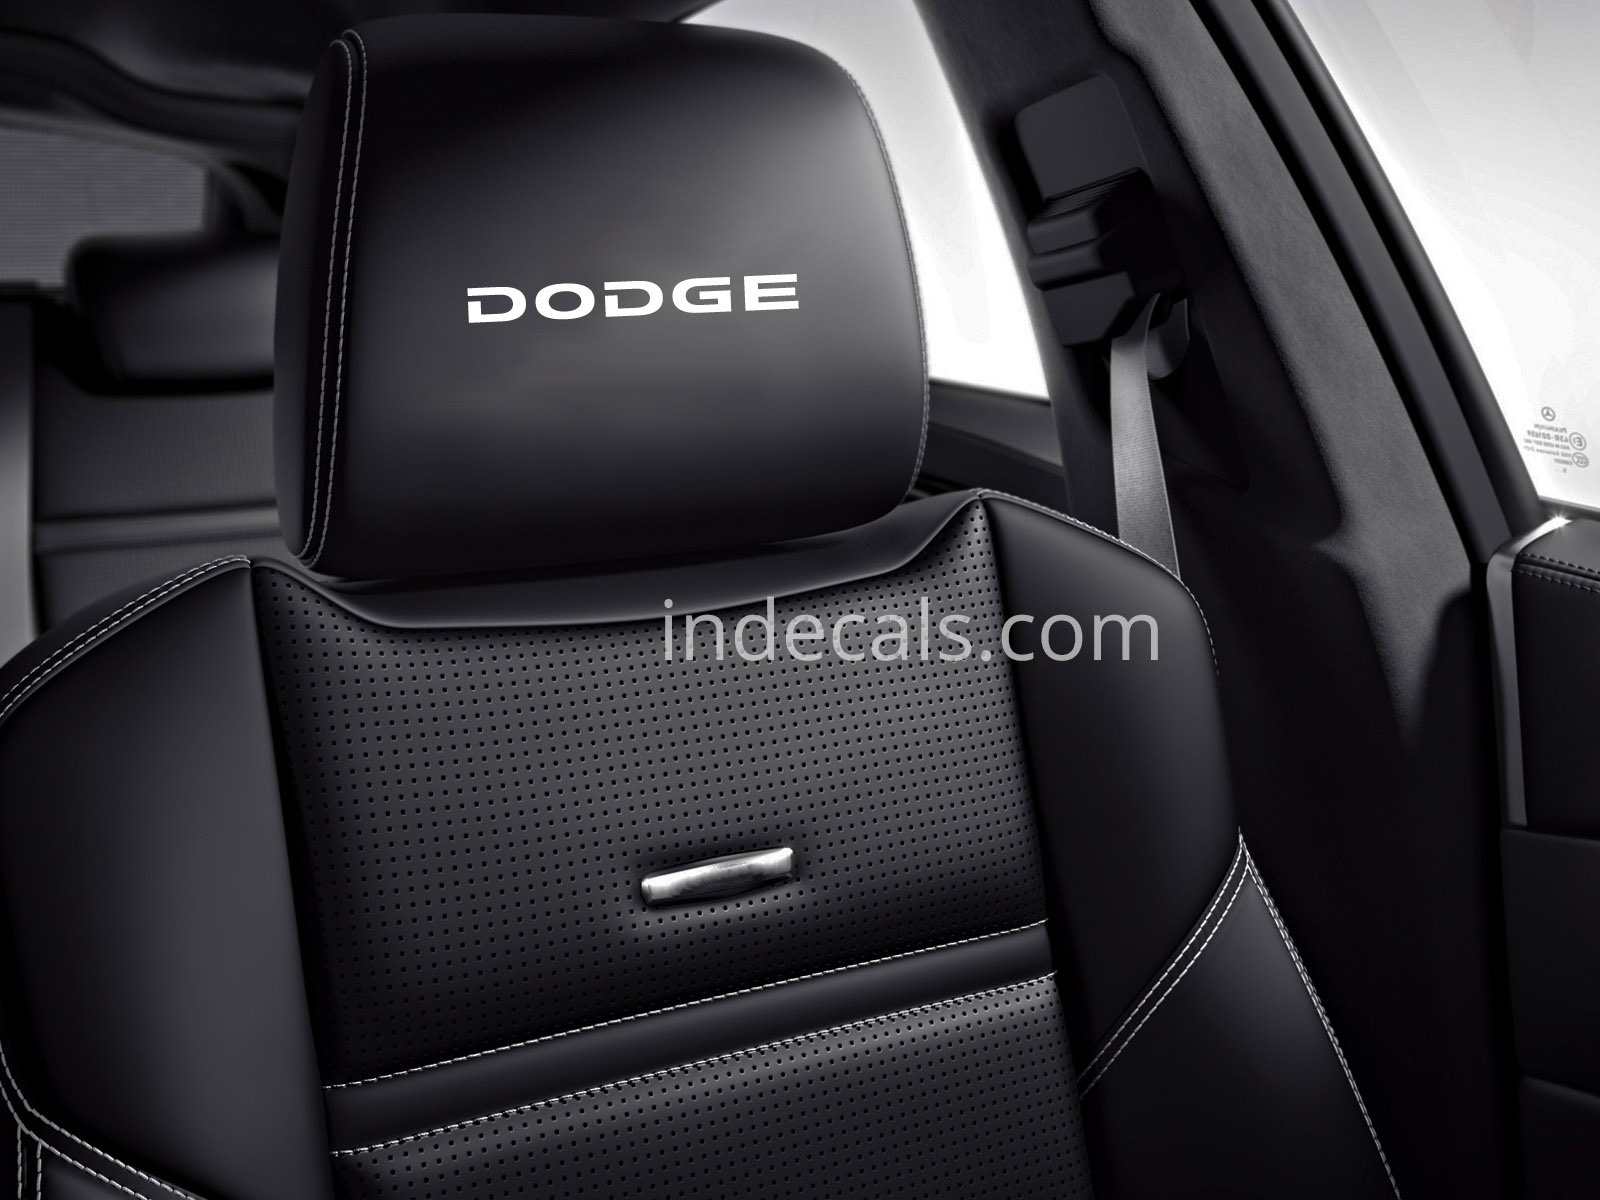 6 x Dodge Stickers for Headrests - White